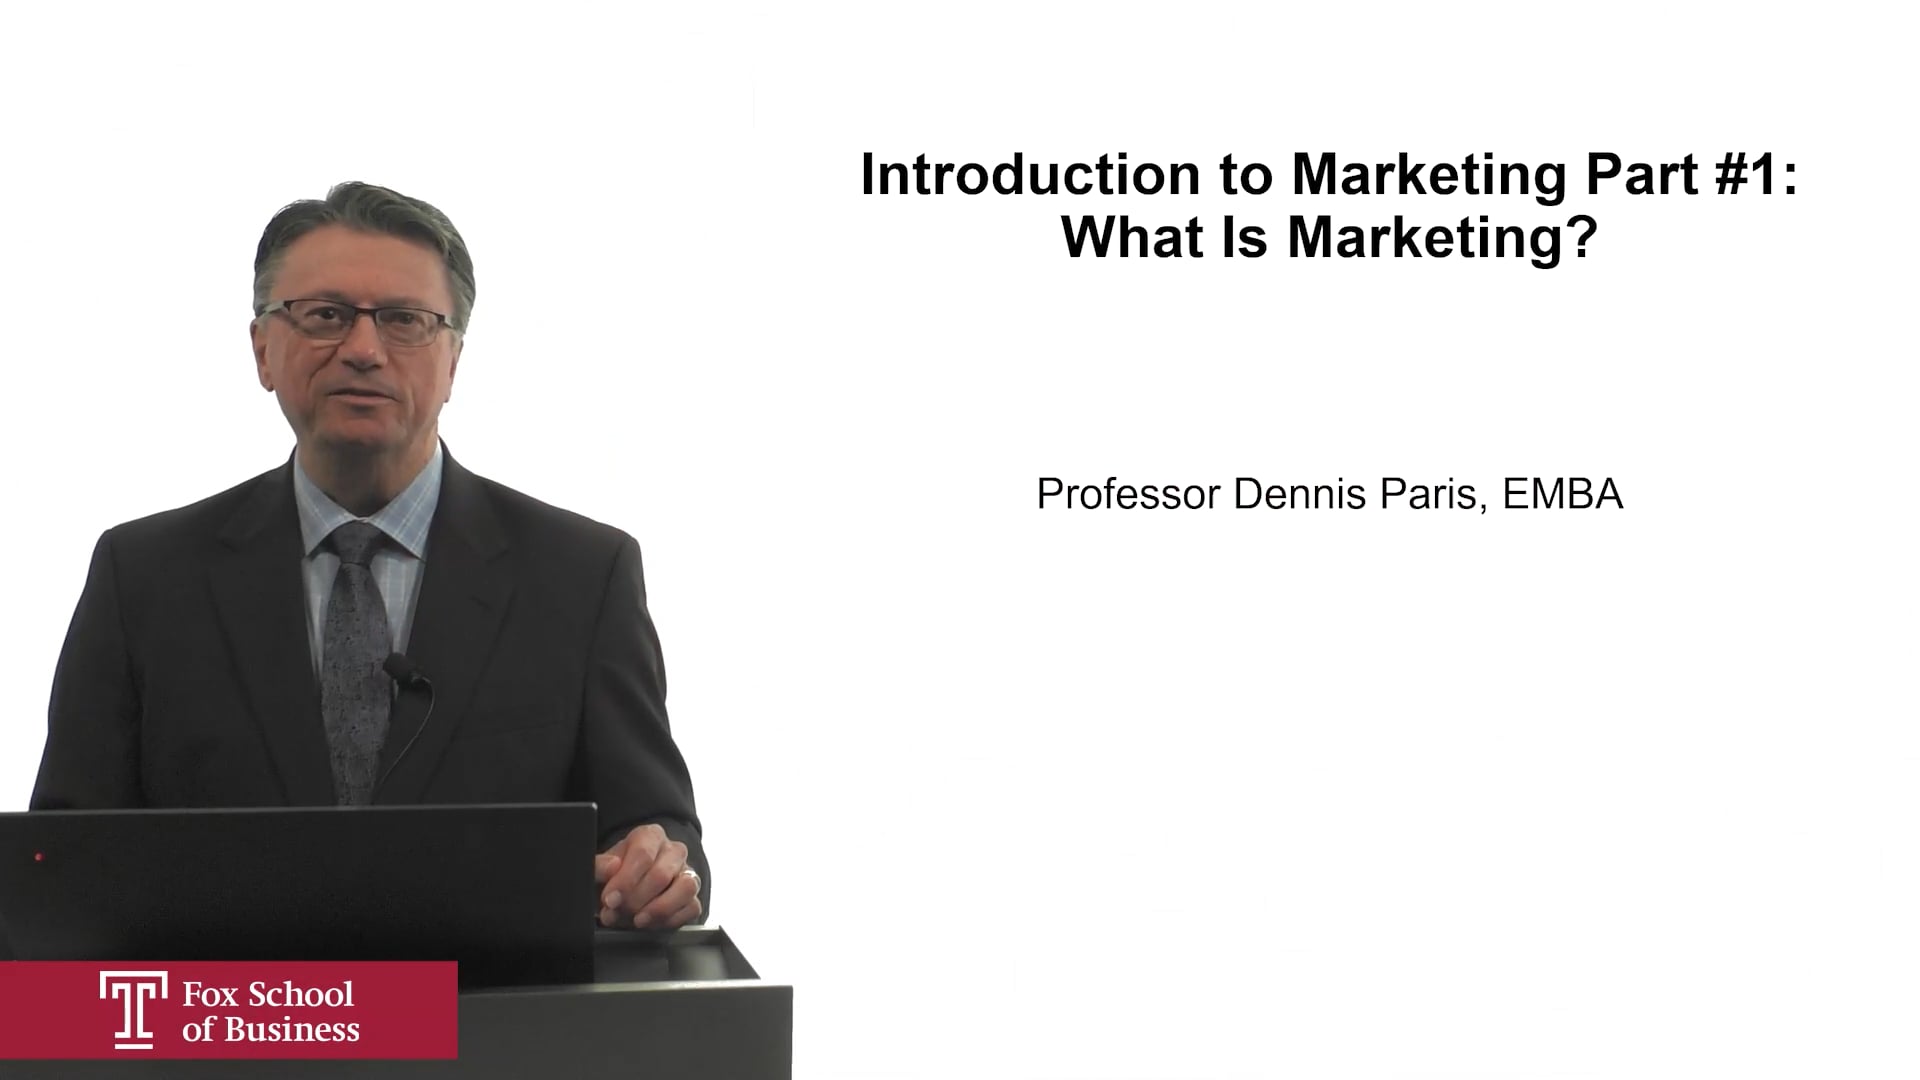 Intro to Marketing Part 1: What is Marketing?